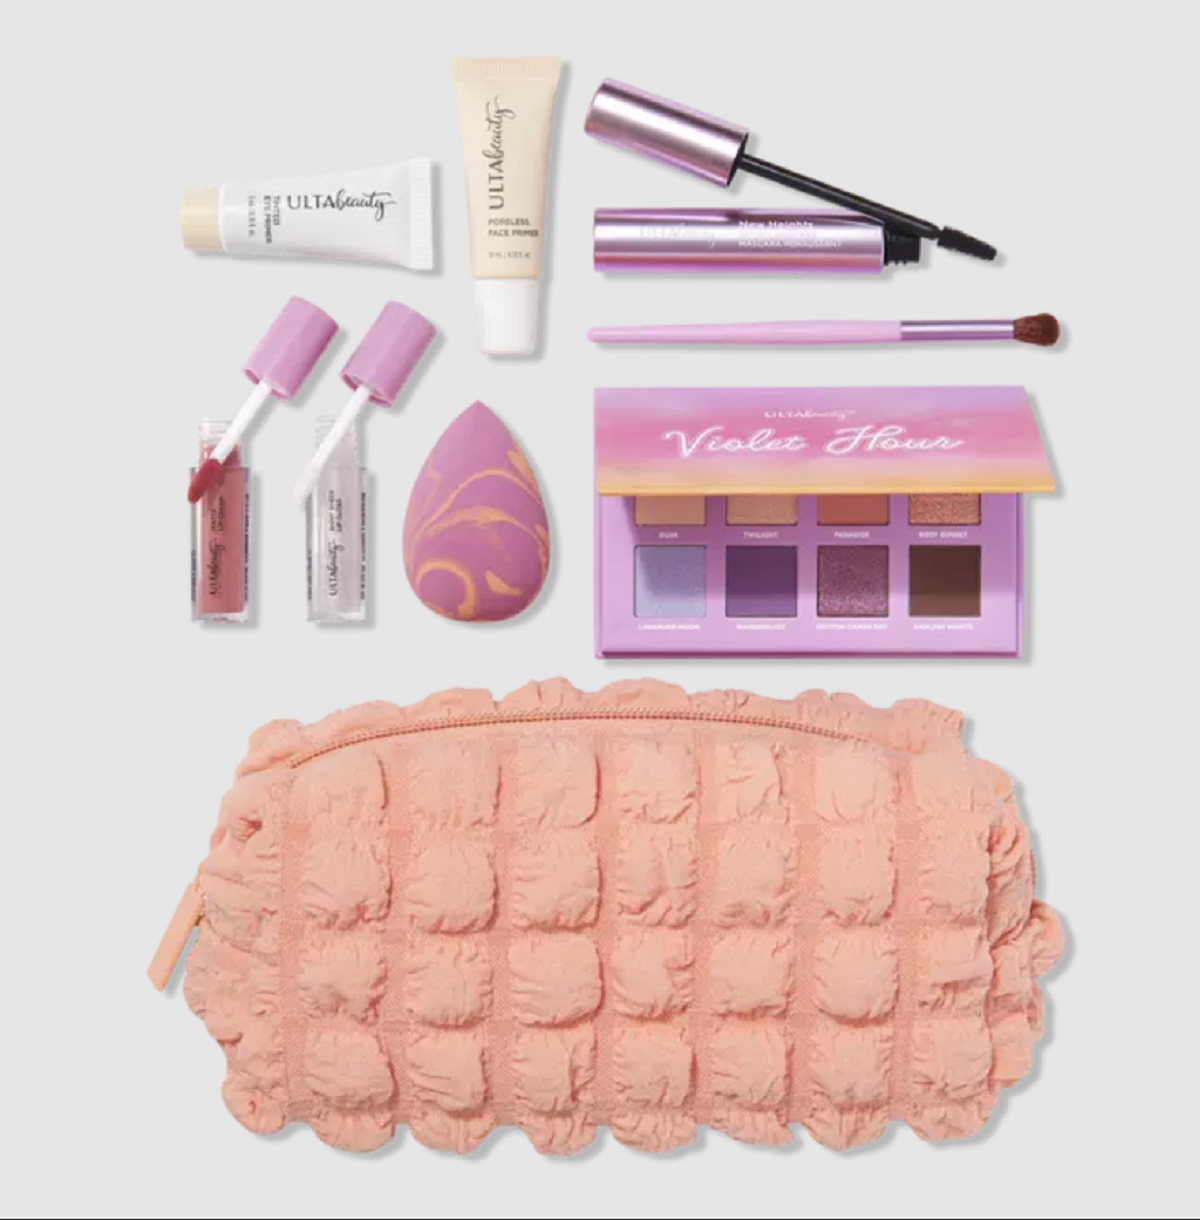 Free 9 Piece Gift with a $19.50 Brand Order at Ulta Beauty